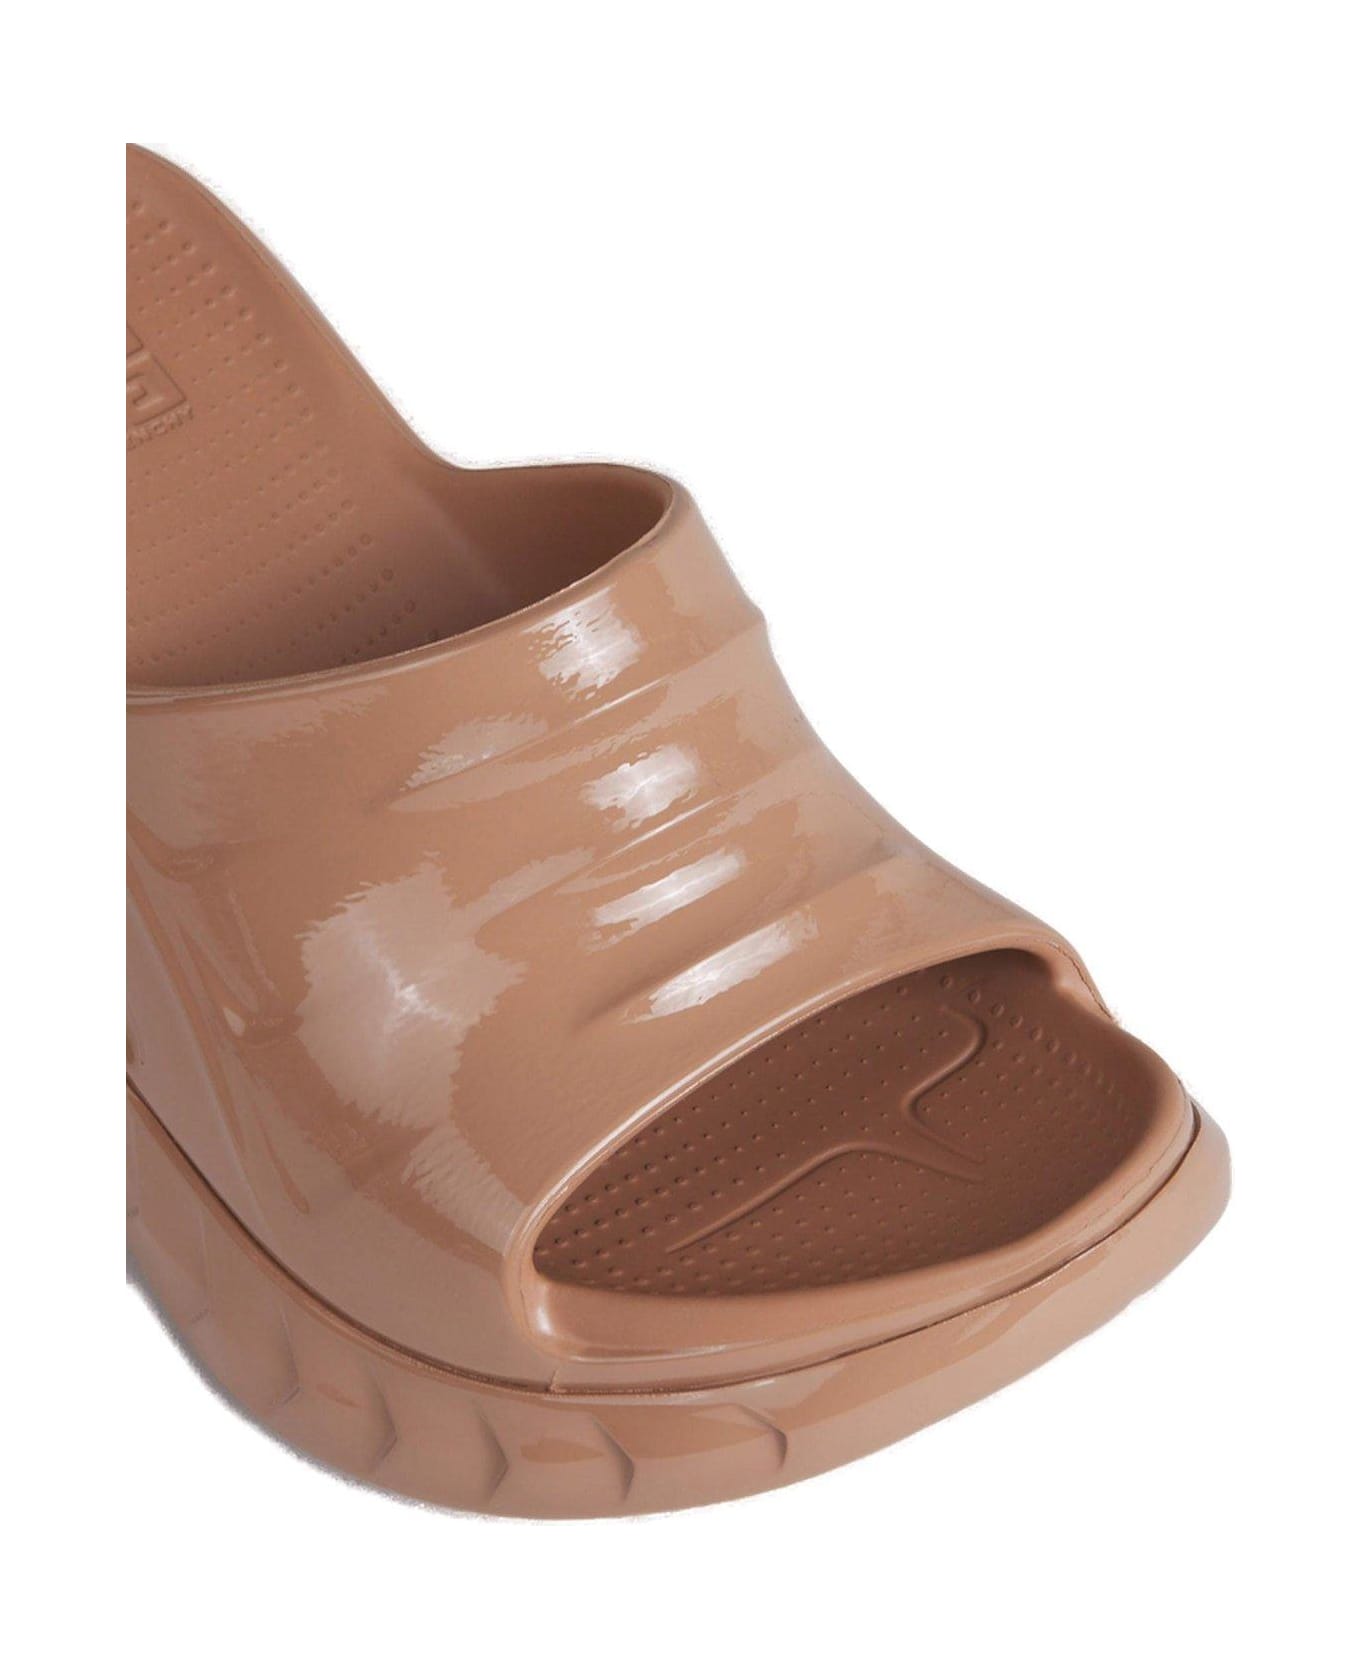 Givenchy Marshmallow Wedge Sandals - Powder